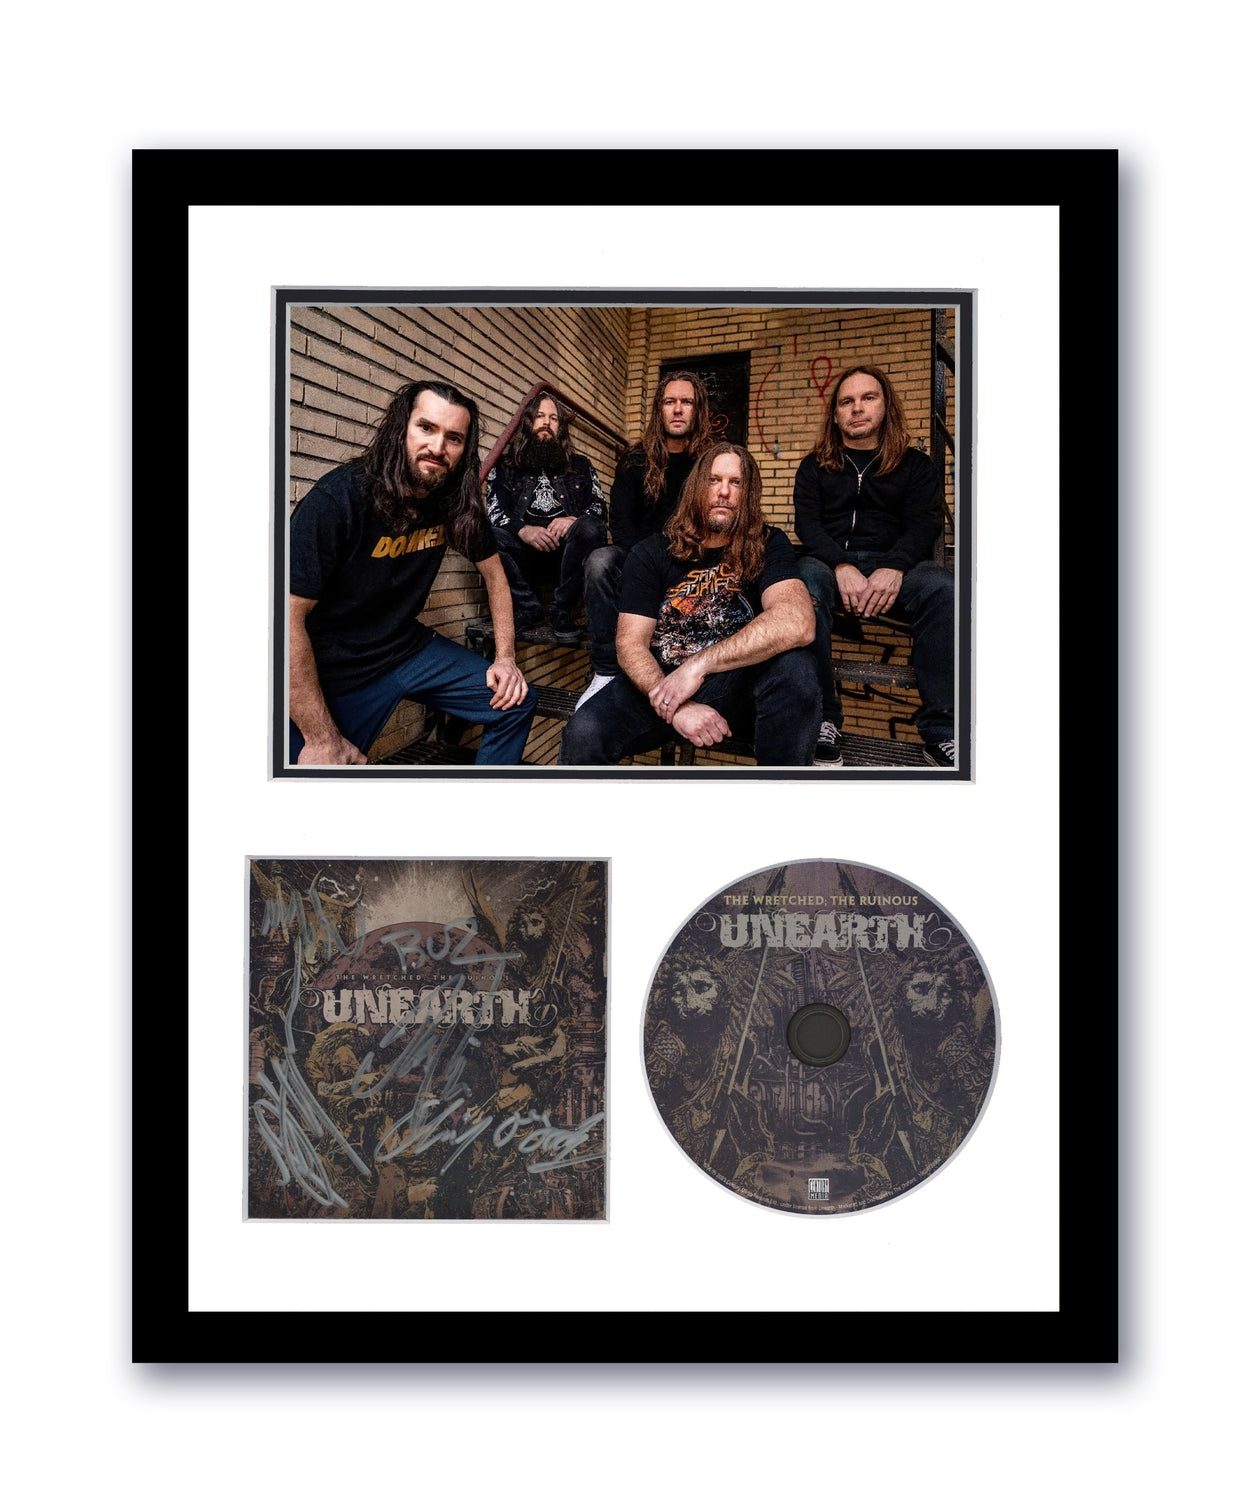 Unearth Signed 11x14 Custom Framed CD The Wretched The Ruinous Autographed ACOA